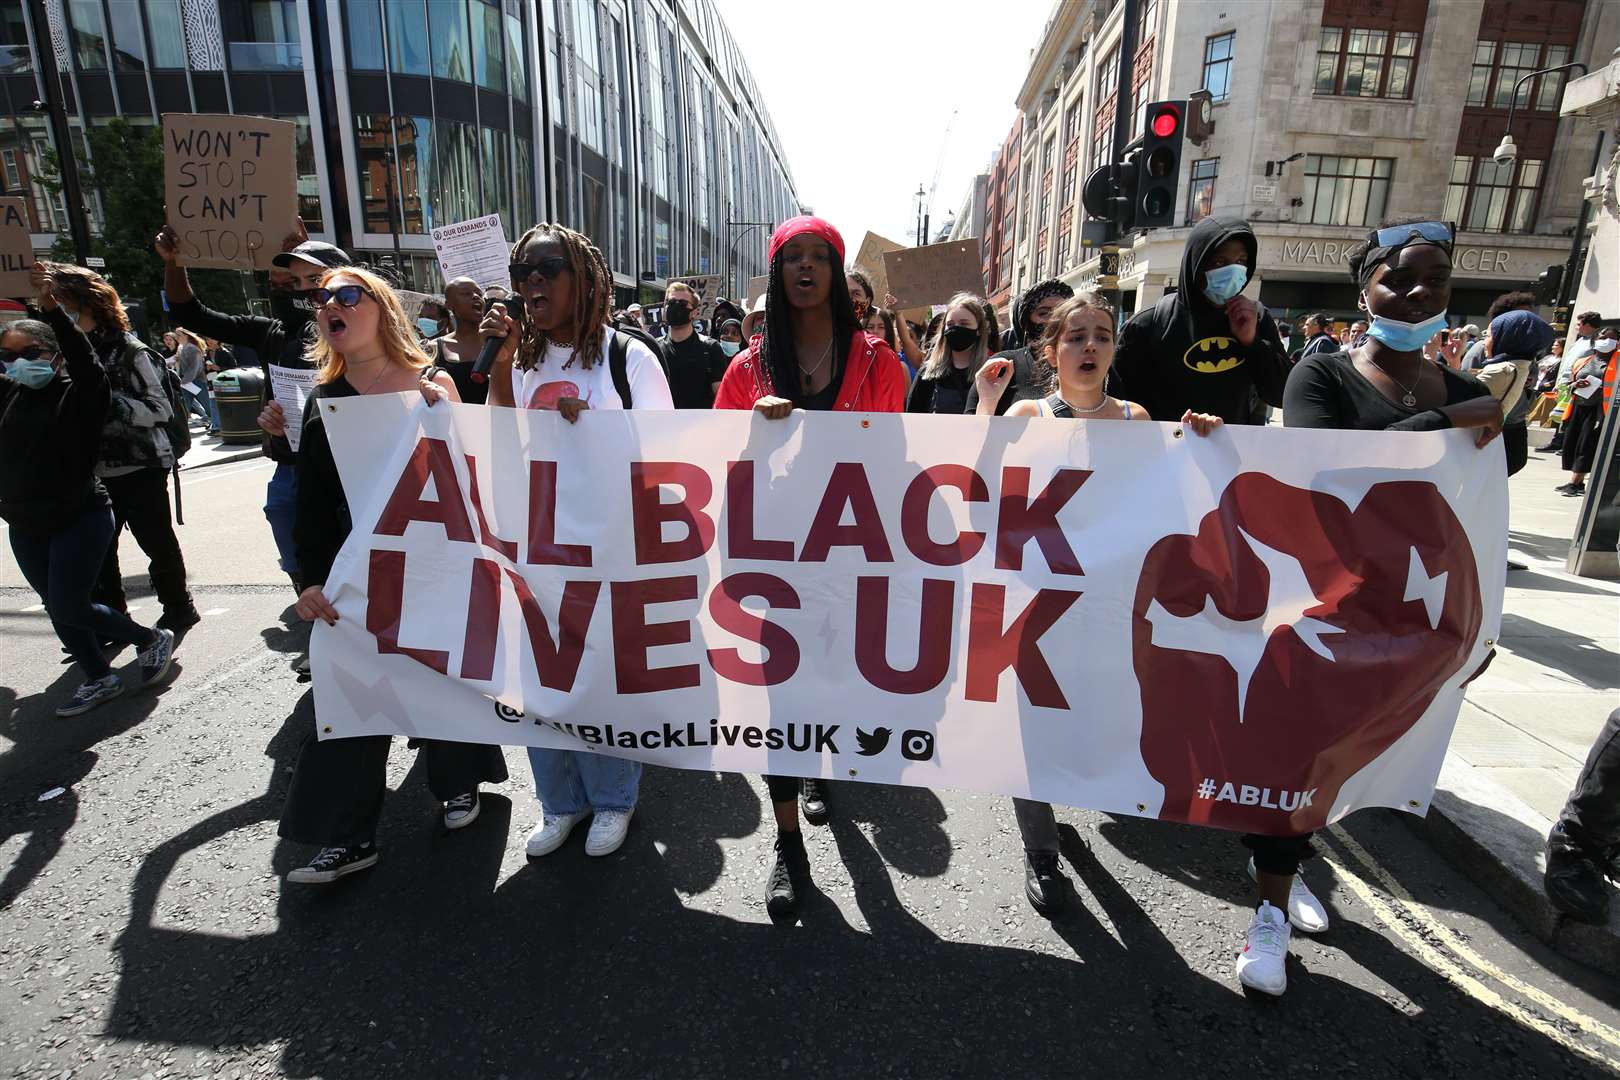 A Black Lives Matter protest makes its way along Oxford Street in central London (Jonathan Brady/PA)